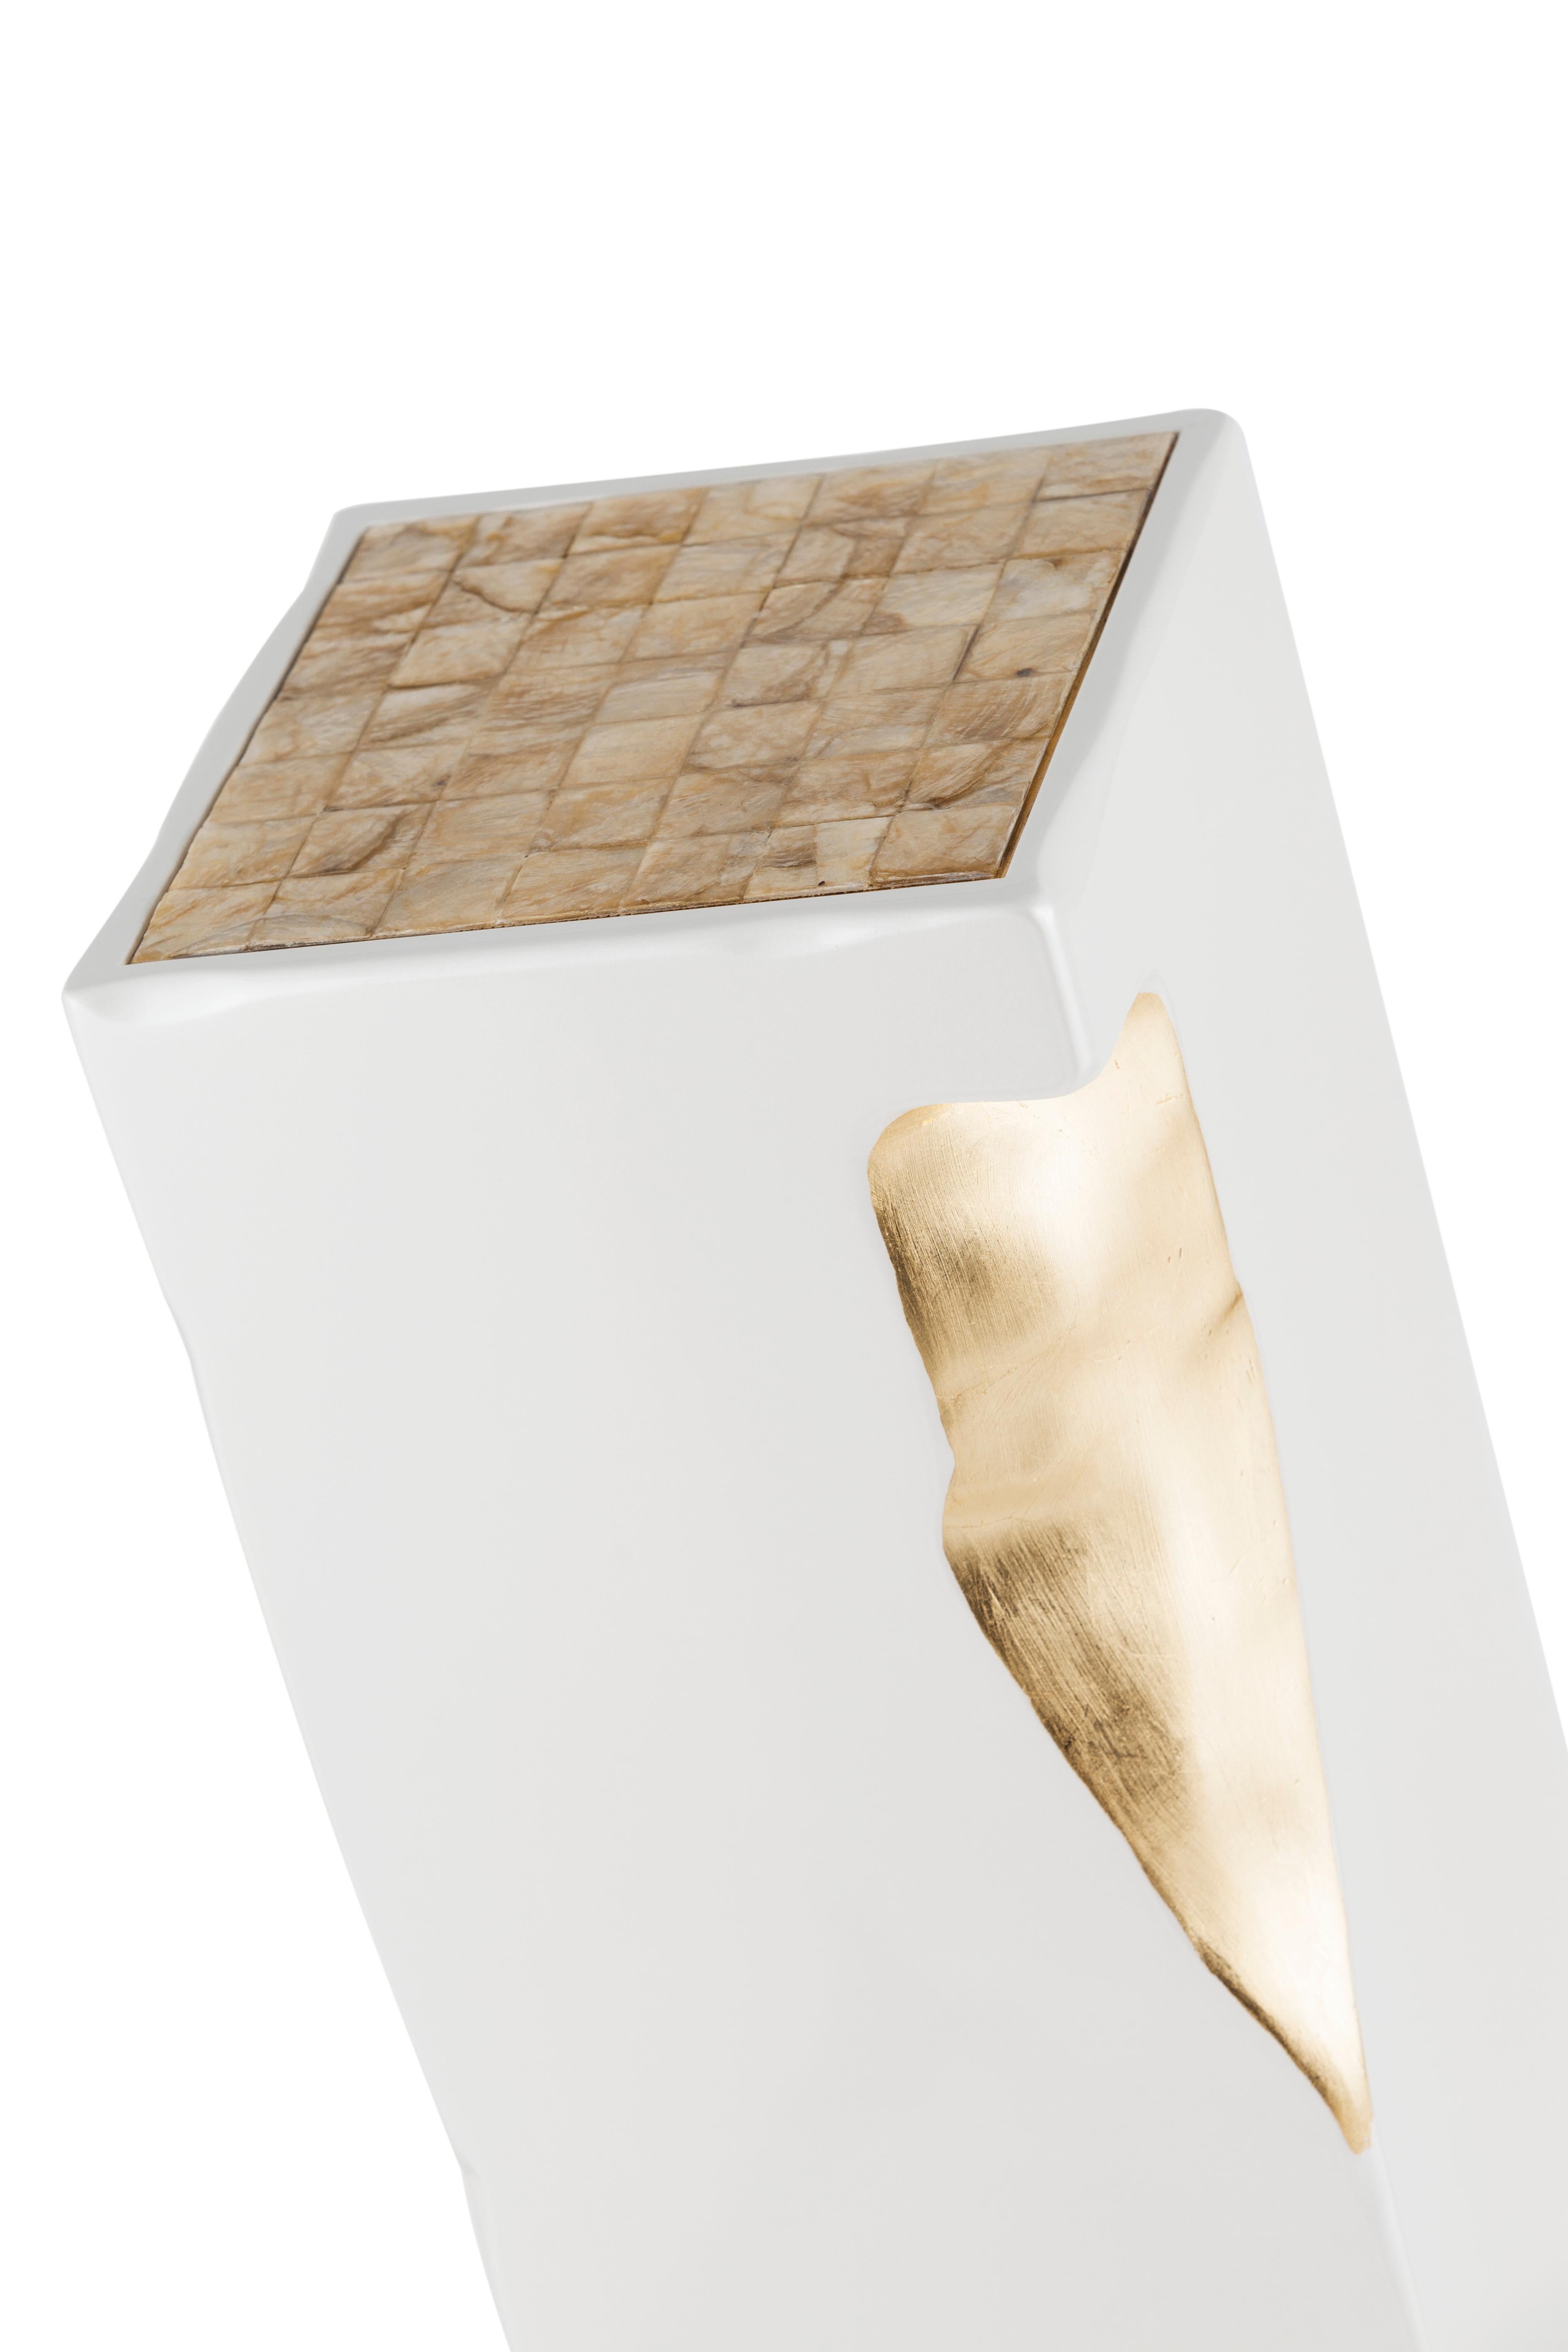 Martin Pedestal Stand, Modern Collection, Handcrafted in Portugal - Europe by GF Modern.

Martin is the perfect standing piece of art to enhance any interior. A unique design with contrasting details, Martin stands on its own.

The pearl white